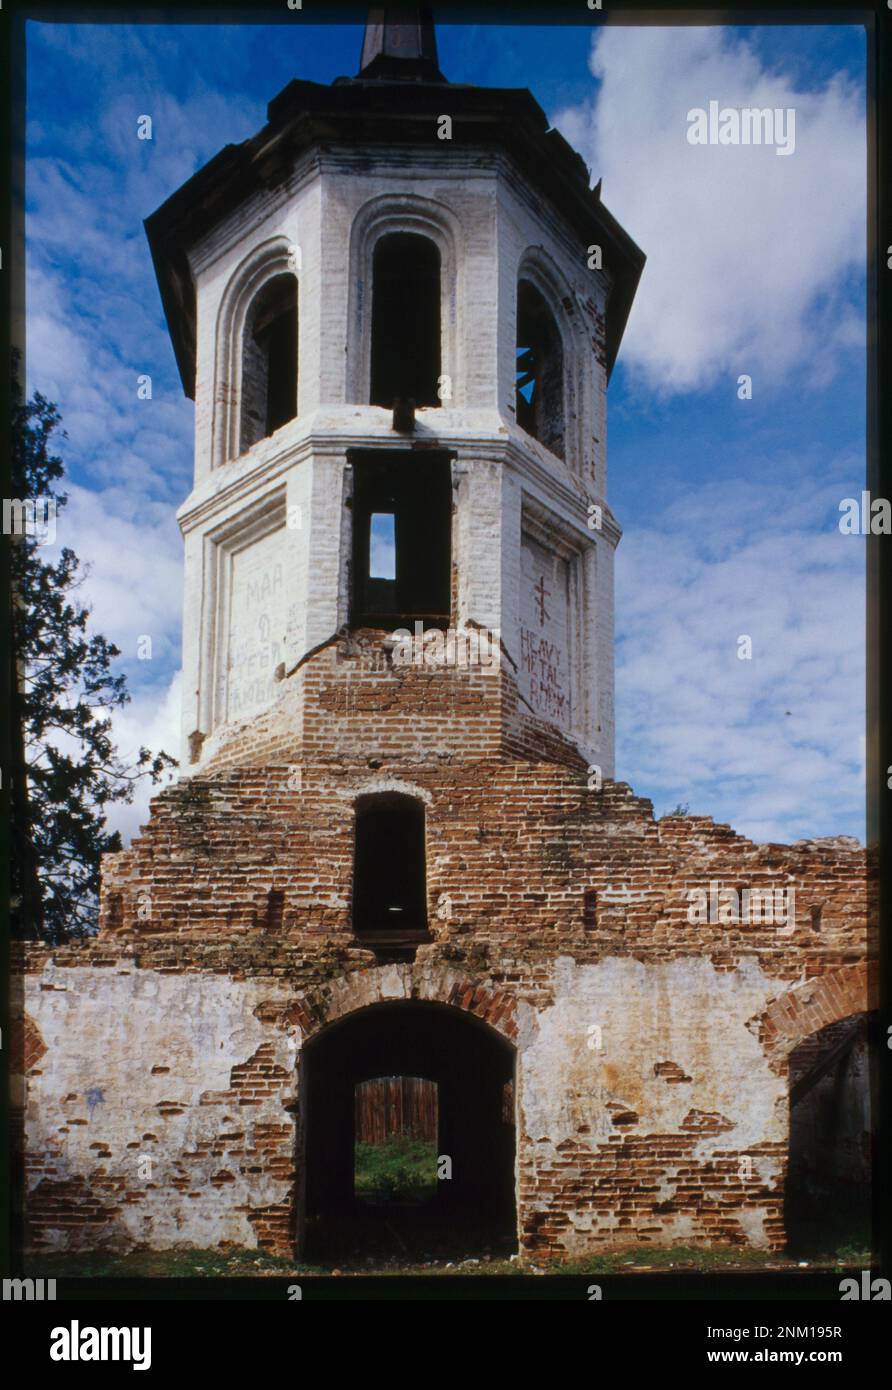 Church of the Purification (1788), west facade, bell tower, Bel'sk, Russia. Brumfield photograph collection. Orthodox churches,Russia Federation,2000. , Bell towers,Russia Federation,2000. , Russia Federation,Irkutskaia oblast  ,Bel sk. Stock Photo